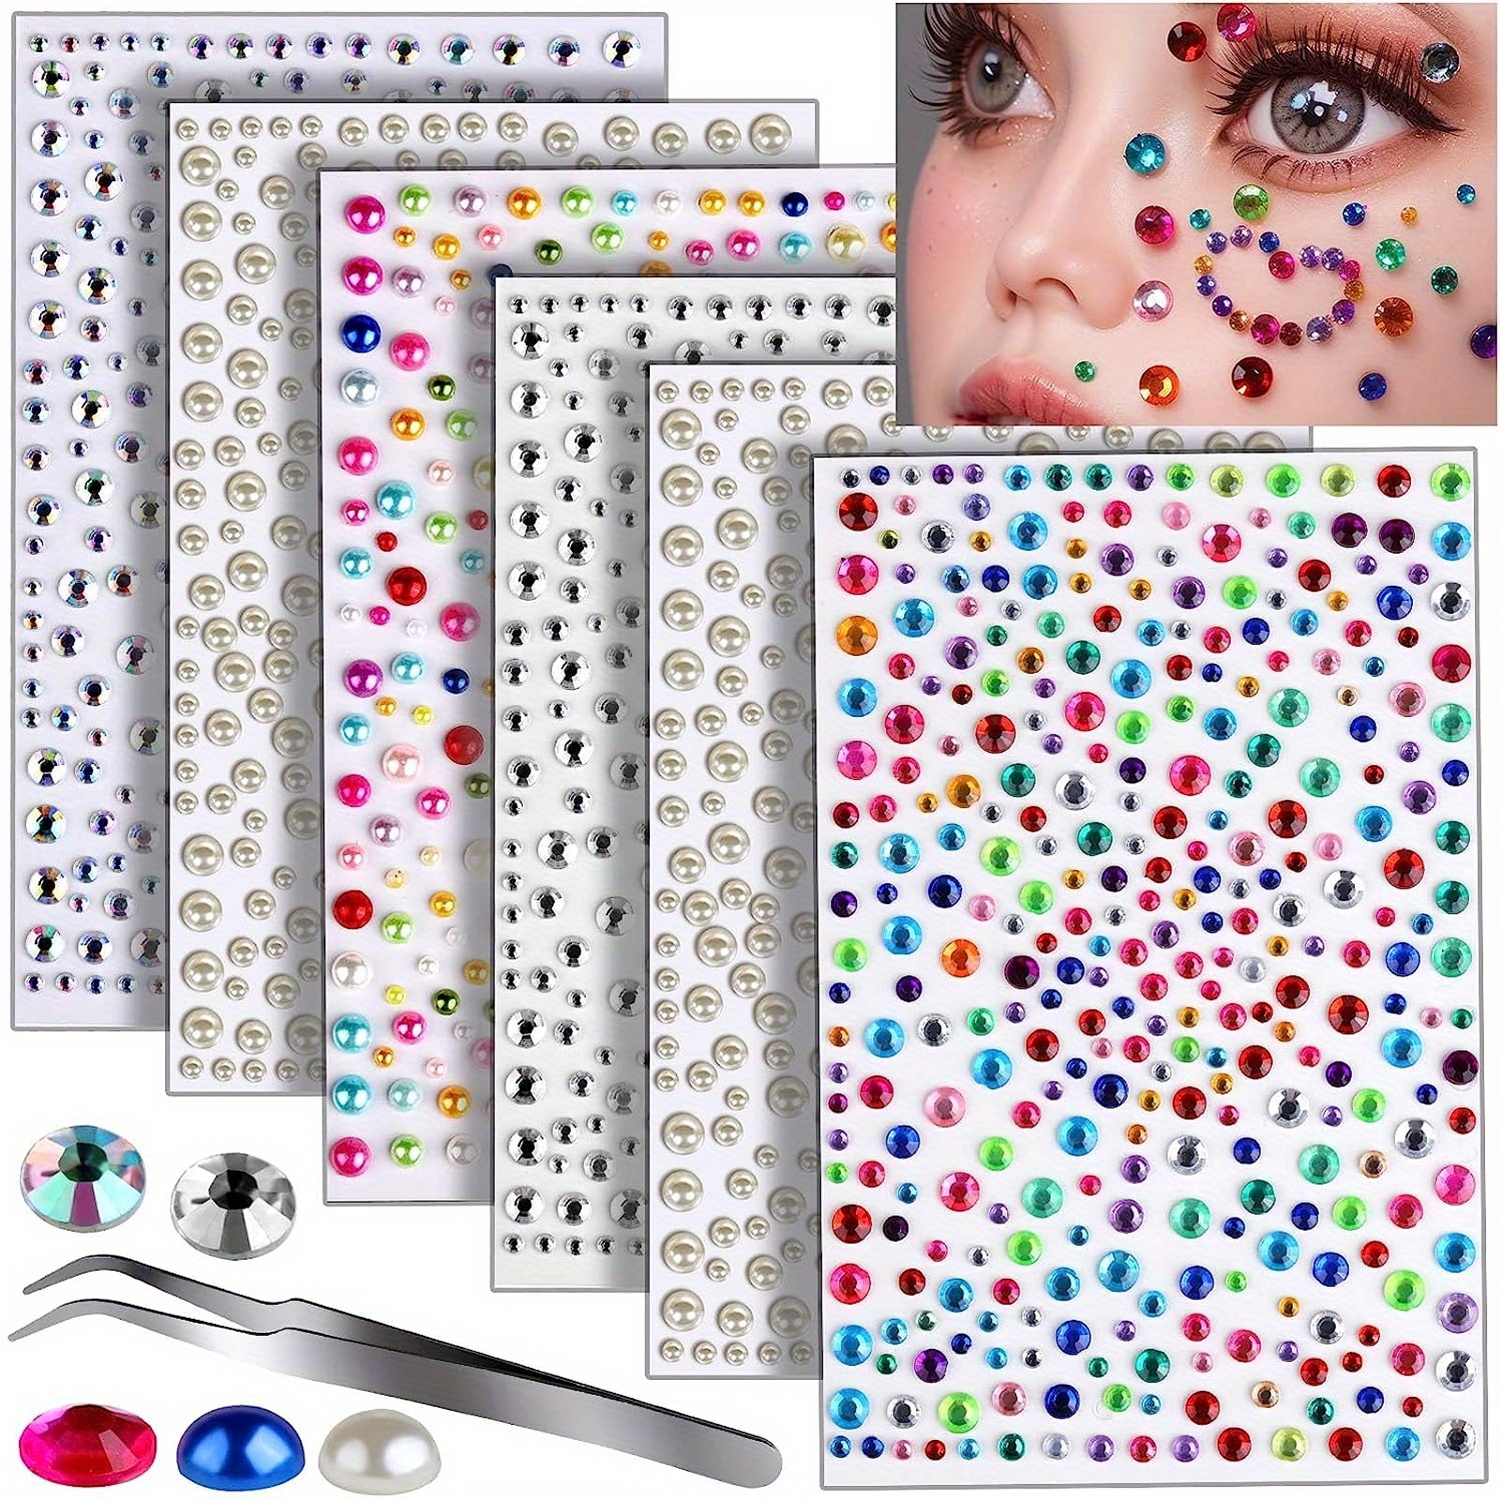 Beaupretty 18 Sheets Pearls Body Jewels Stickers Self Adhesive Rhinestone  Stickers Gem Stickers for Crafts Hair Gems Stick on Body Gems Eye Stickers